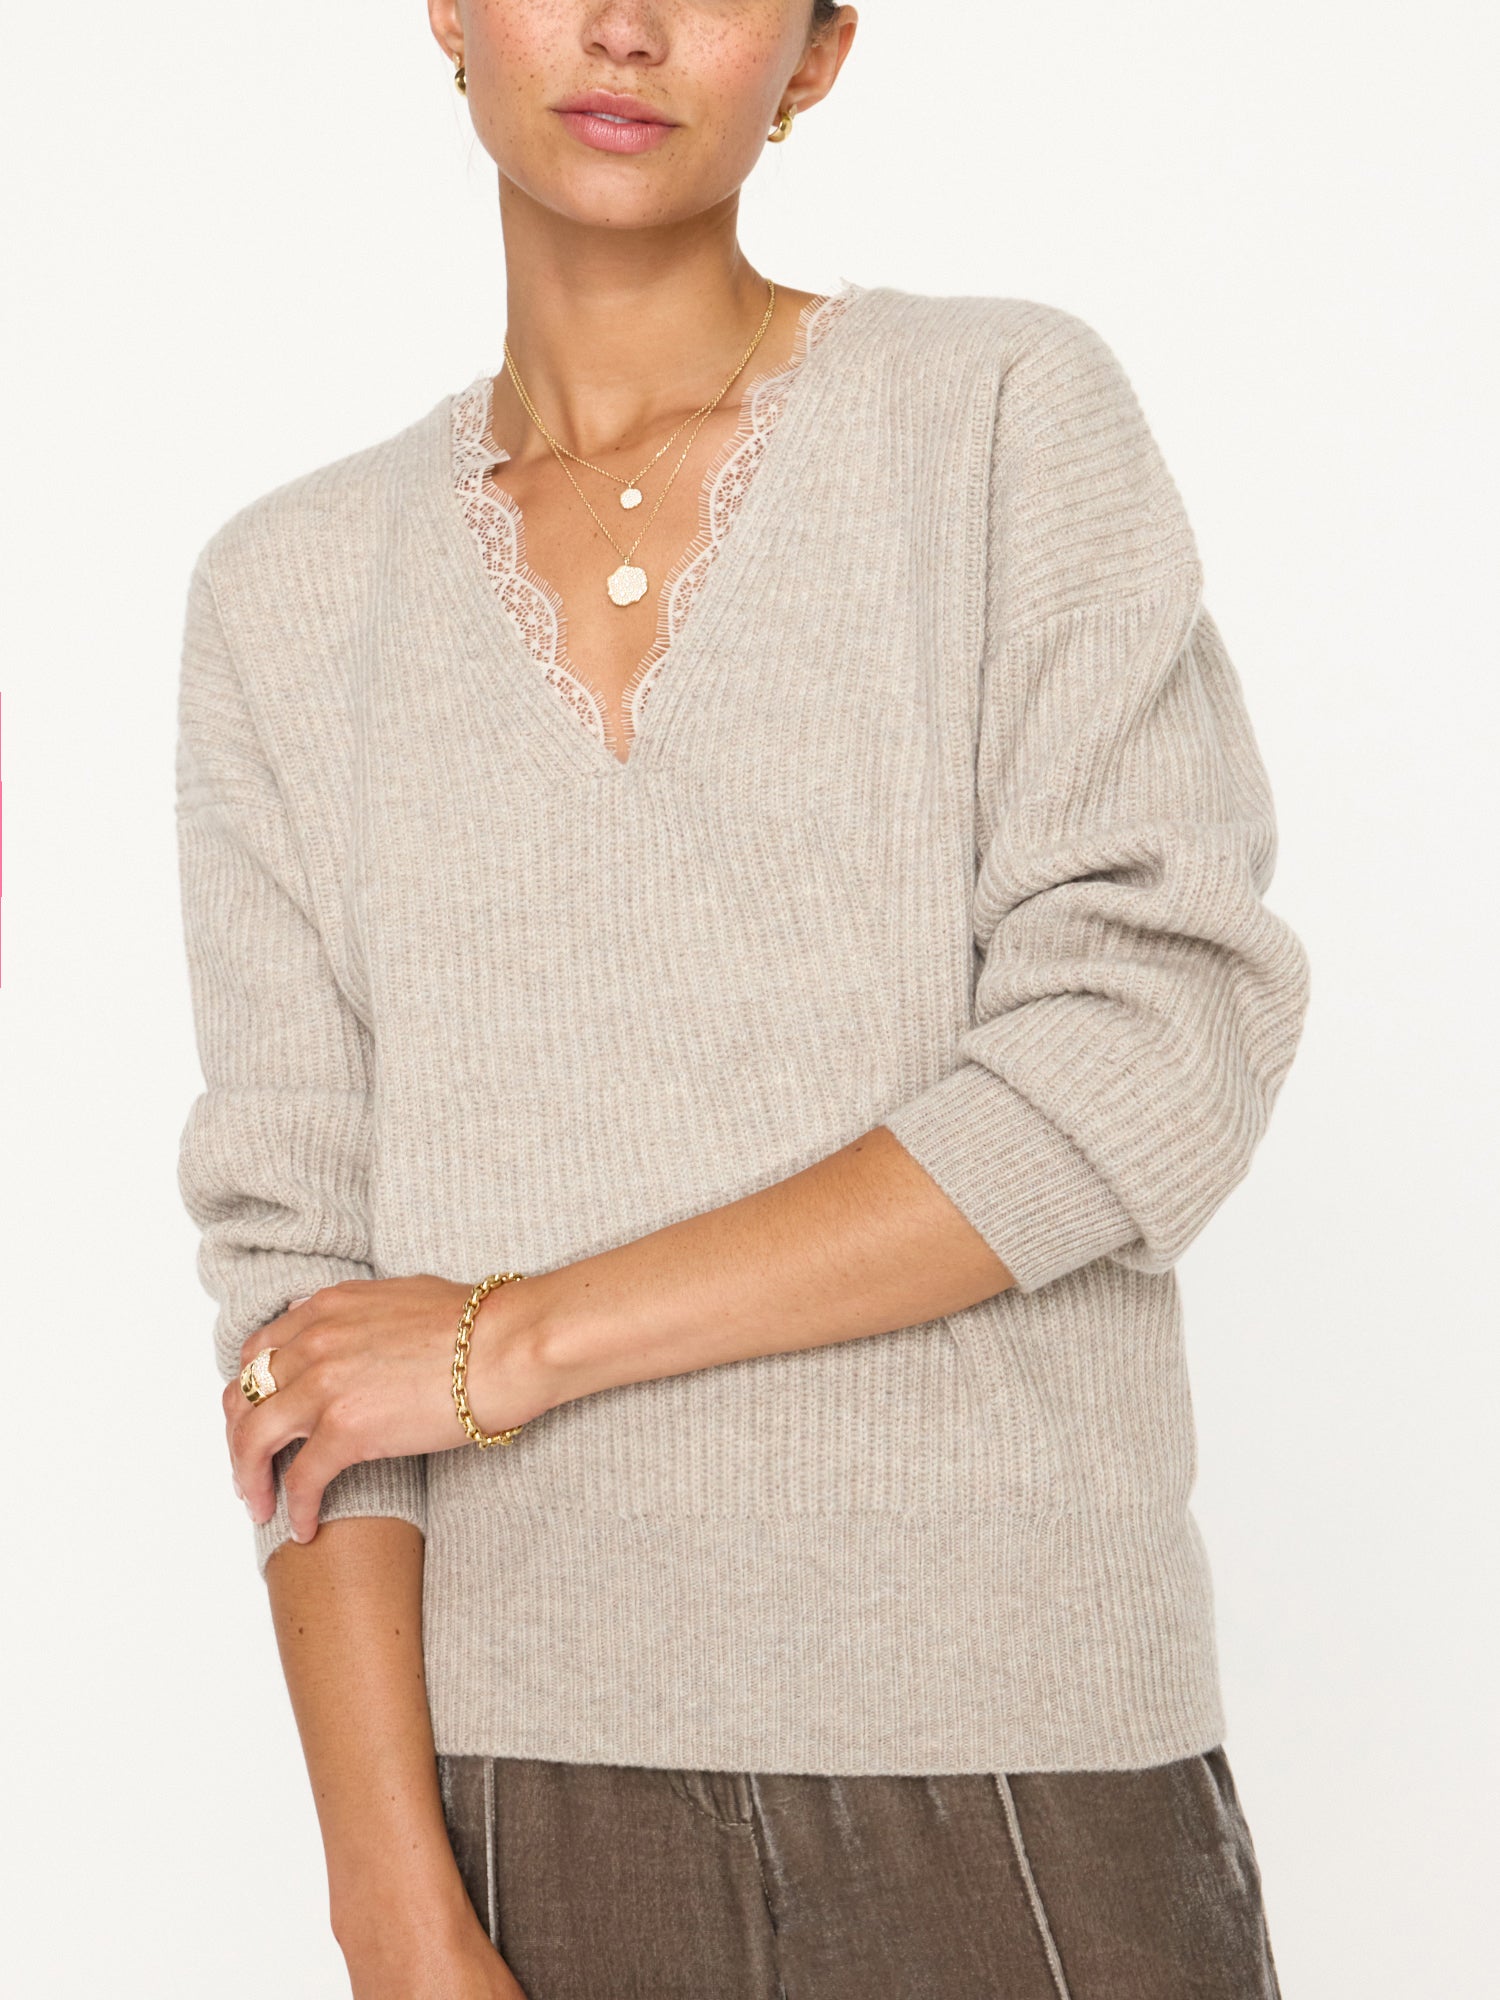 Ava v neck light grey sweater front view 3 